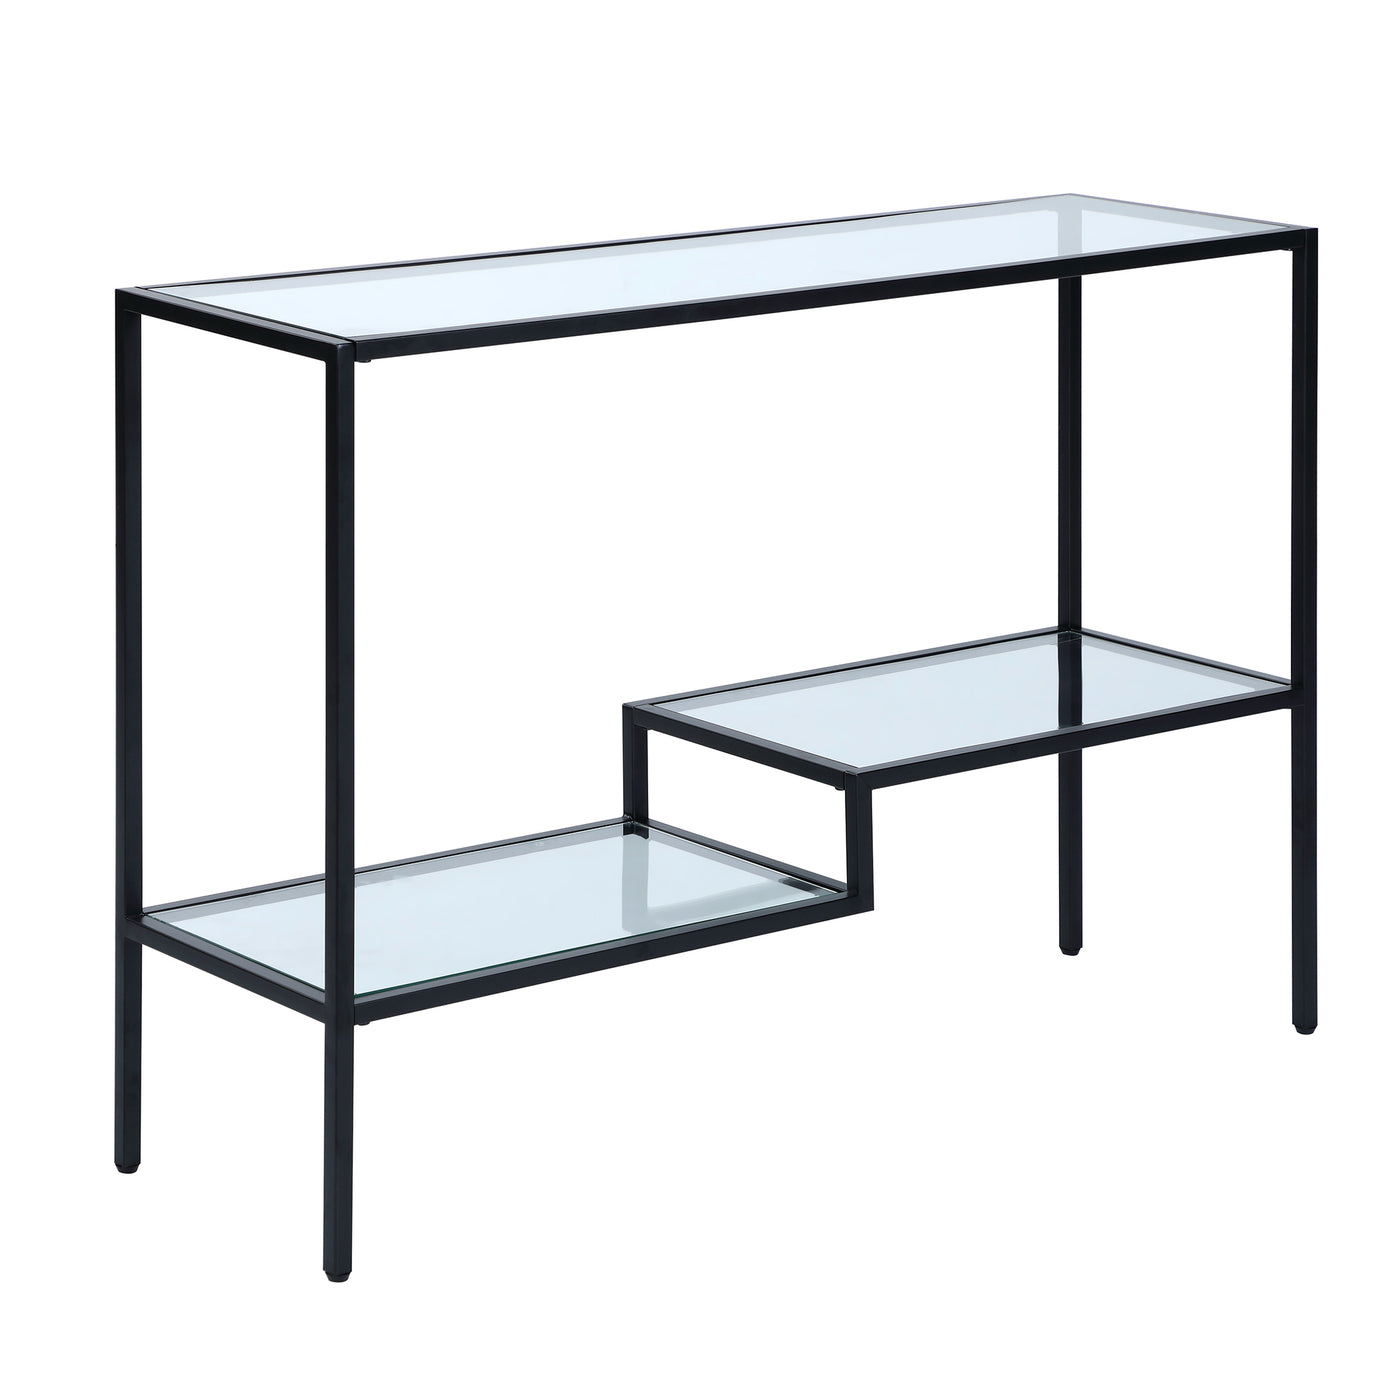 FirsTime & Co. Black Kaylee Console Table, Glam Style, Made of Metal